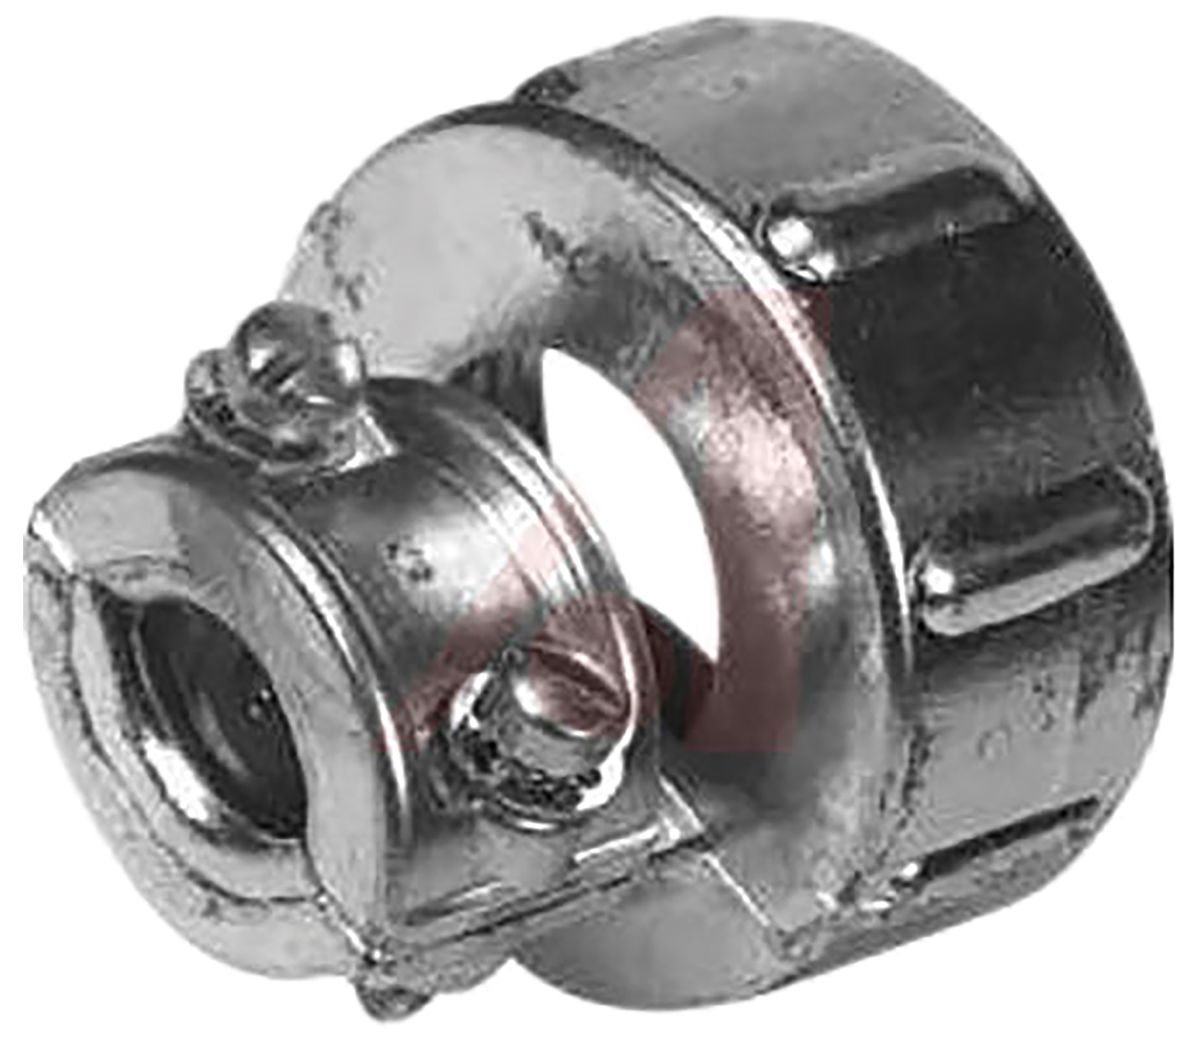 Amphenol Industrial, 97Size 20, 22 Straight Cable Clamp, For Use With Jacketed Cable, Wires Protected by Tubing